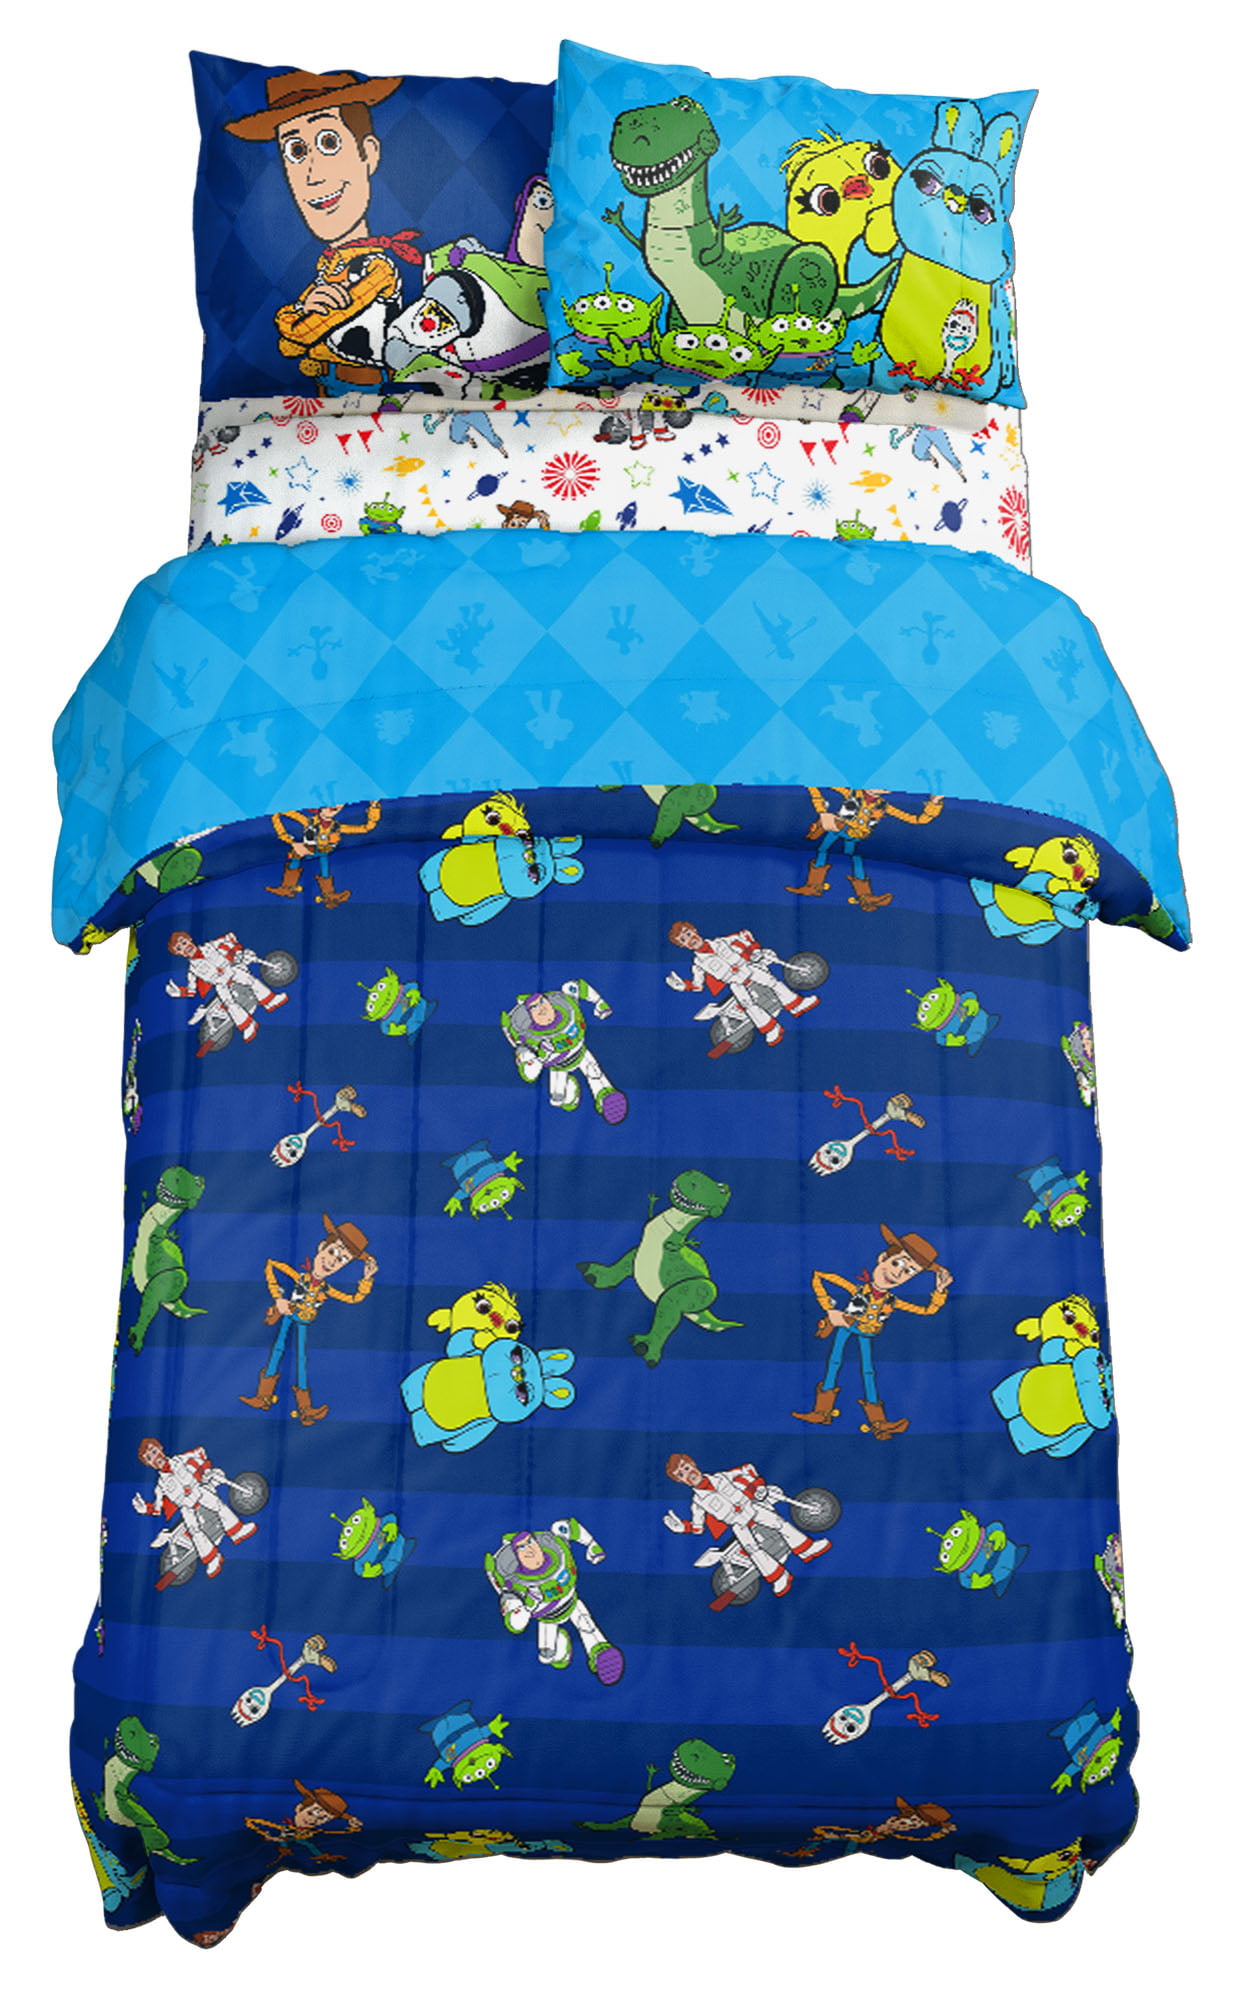 Toys Story 4 Twin Sheet Set with 3 Piece Flat and Fitted Sheets Plus Pillowcase